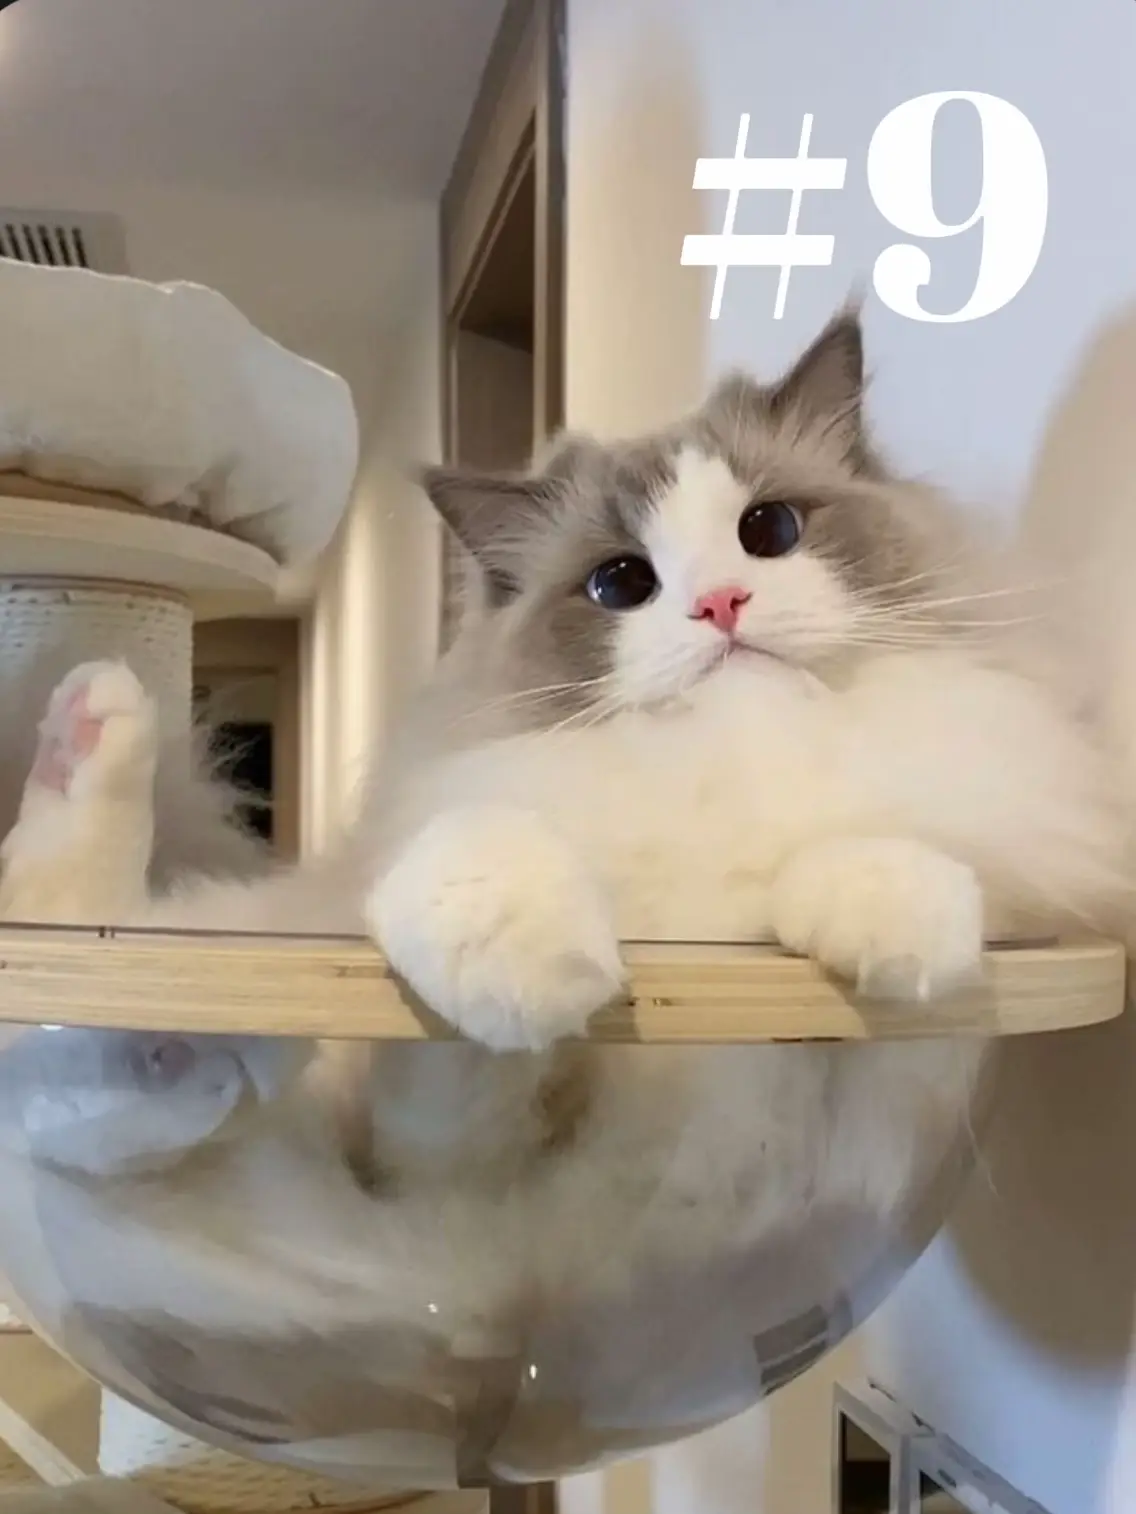 7 Things You Should Know About Ragdoll Cats, by Bom Gamer